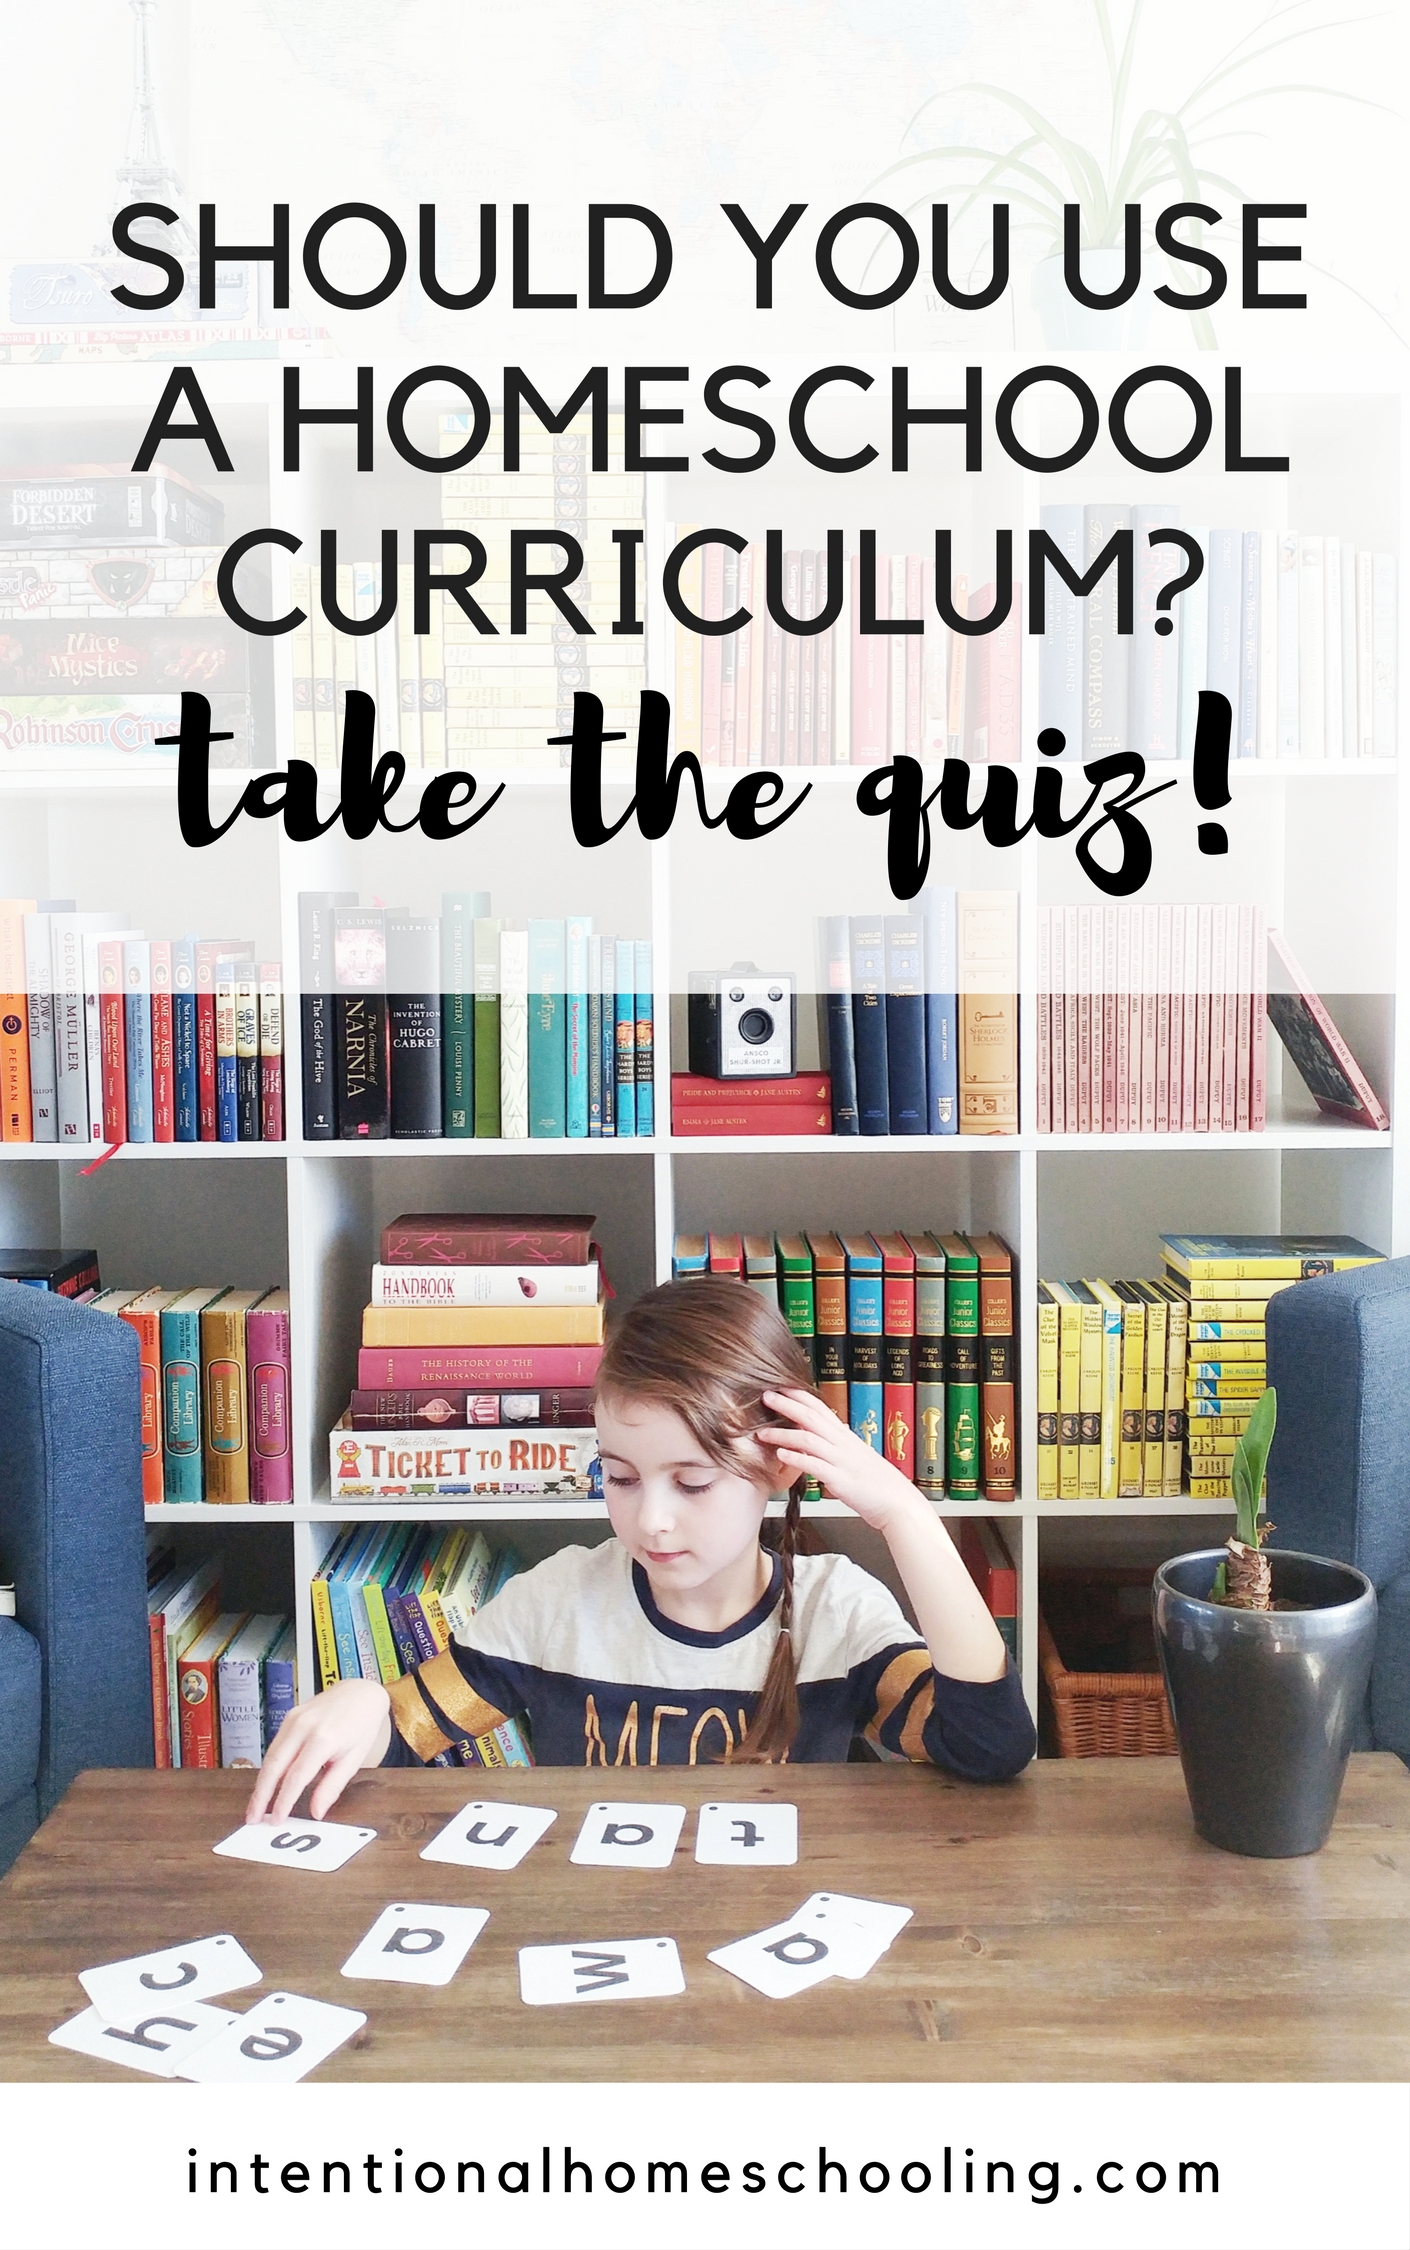 Is Using a Homeschool Curriculum Right for Your Family or Do You Do Better Without a Curriculum or Schedule? Take the quiz to find out!